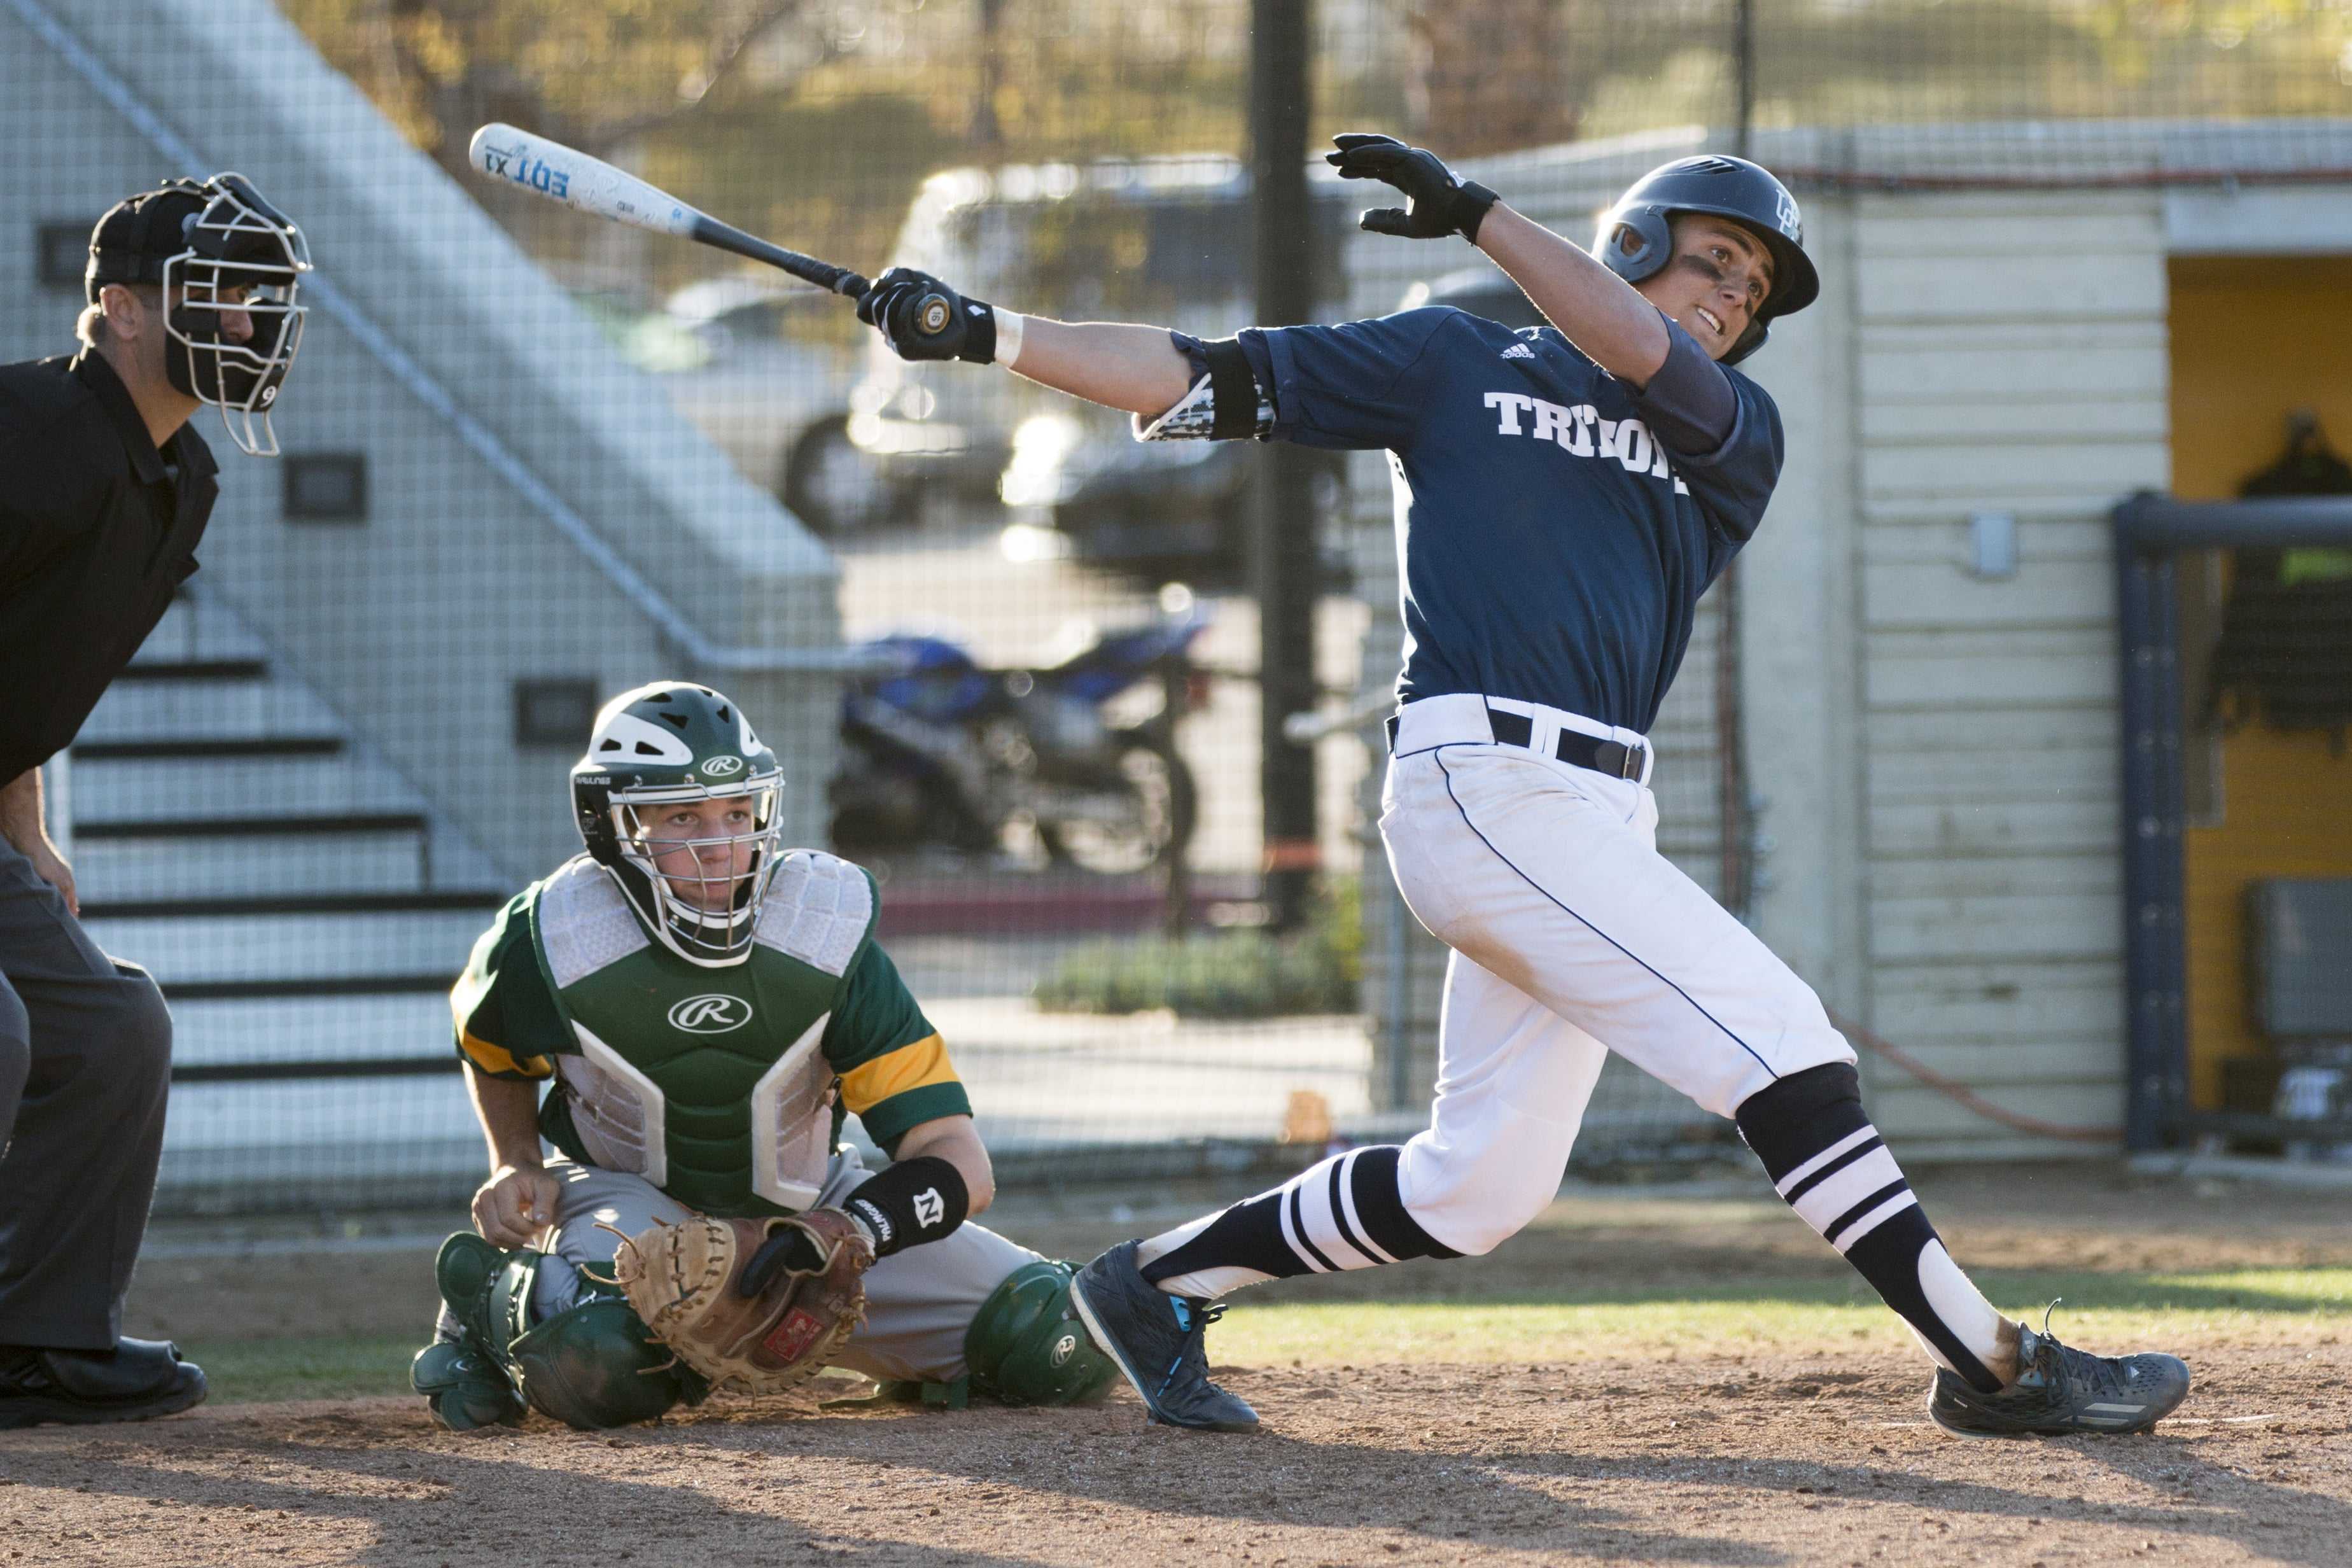 UCSD Baseball Finishes The Season In An CCAA Tournament Loss UCSD